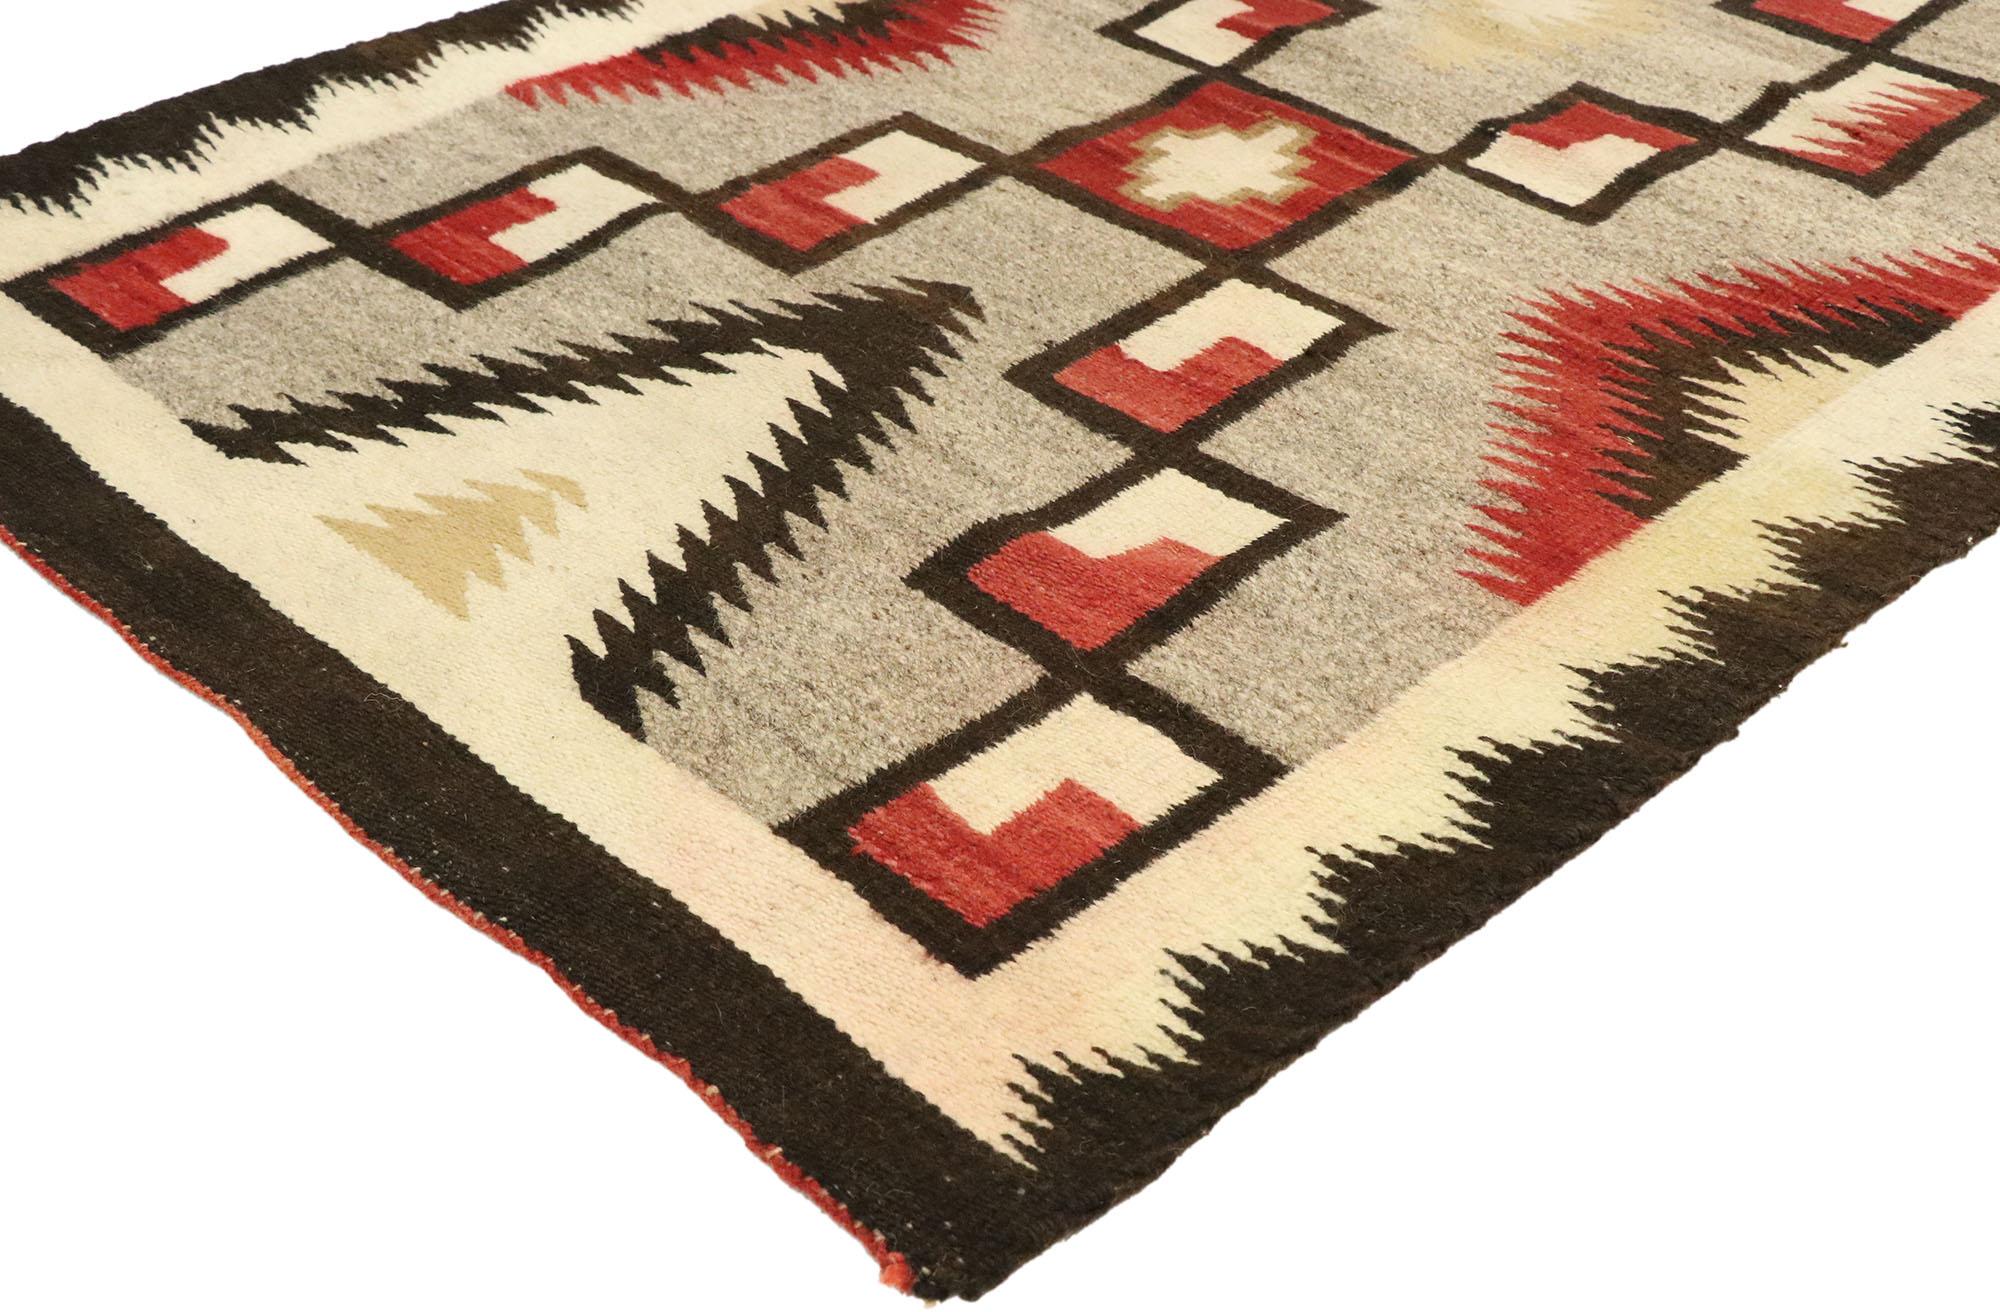 77527, vintage Navajo Kilim rug with Two Grey Hills style 03'00 x 05'11. With its bold expressive design, incredible detail and texture, this handwoven wool vintage Navajo Kilim rug is a captivating vision of woven beauty highlighting Native